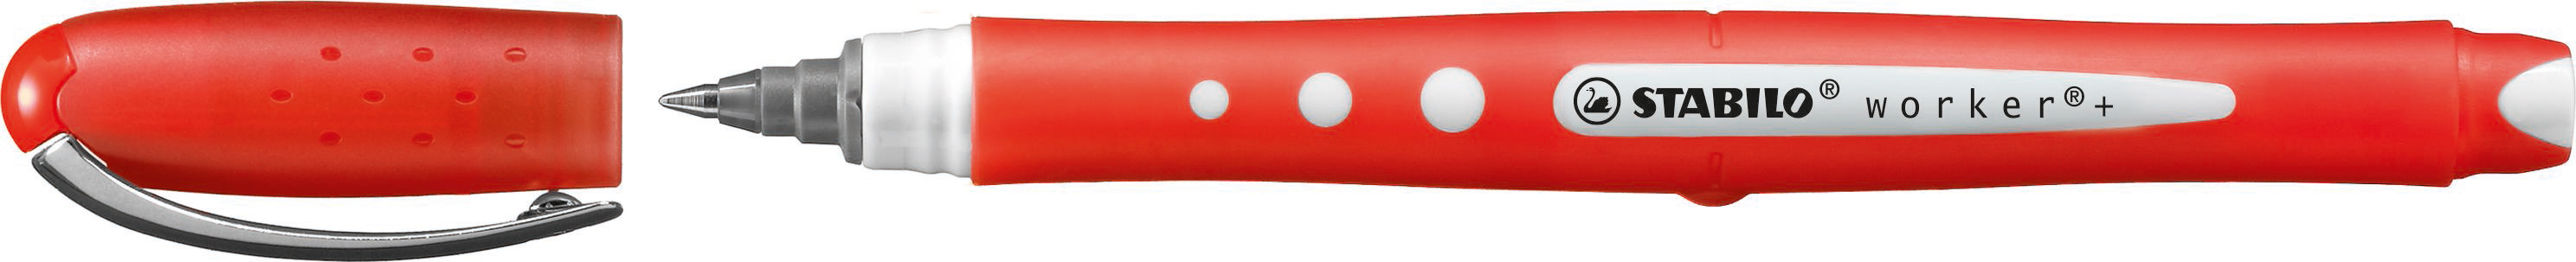 STABILO worker colorful roller 0.5mm 2019/40 rouge rouge